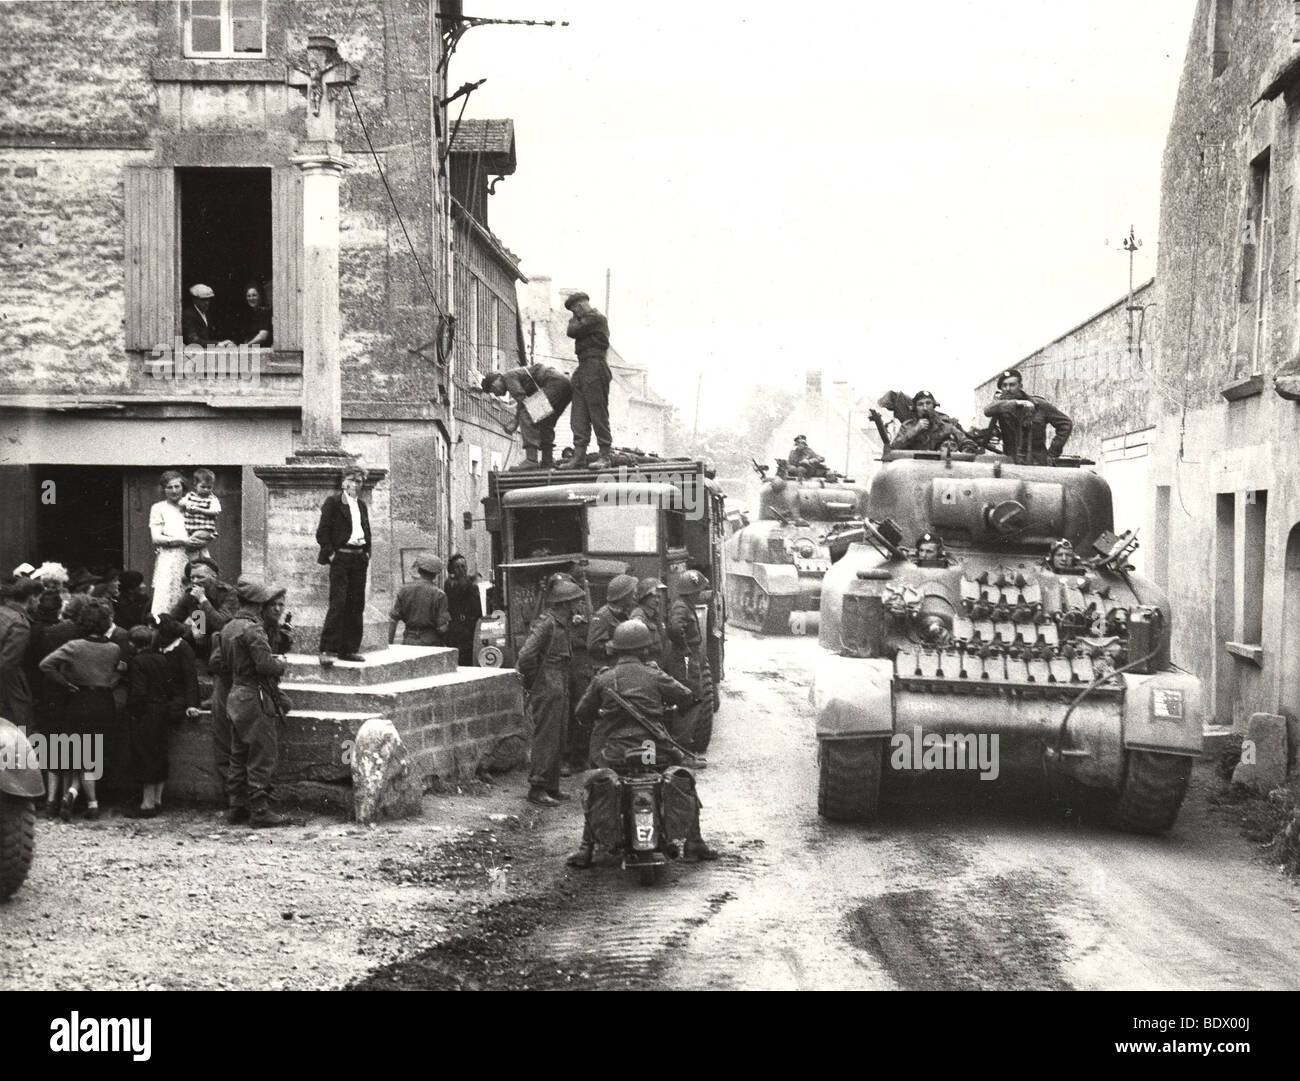 OPERATION OVERLORD  3rd Canadian division with Sherman tanks in village of Reviers after assaulting JUNO beach ton 6 June 1944. Stock Photo